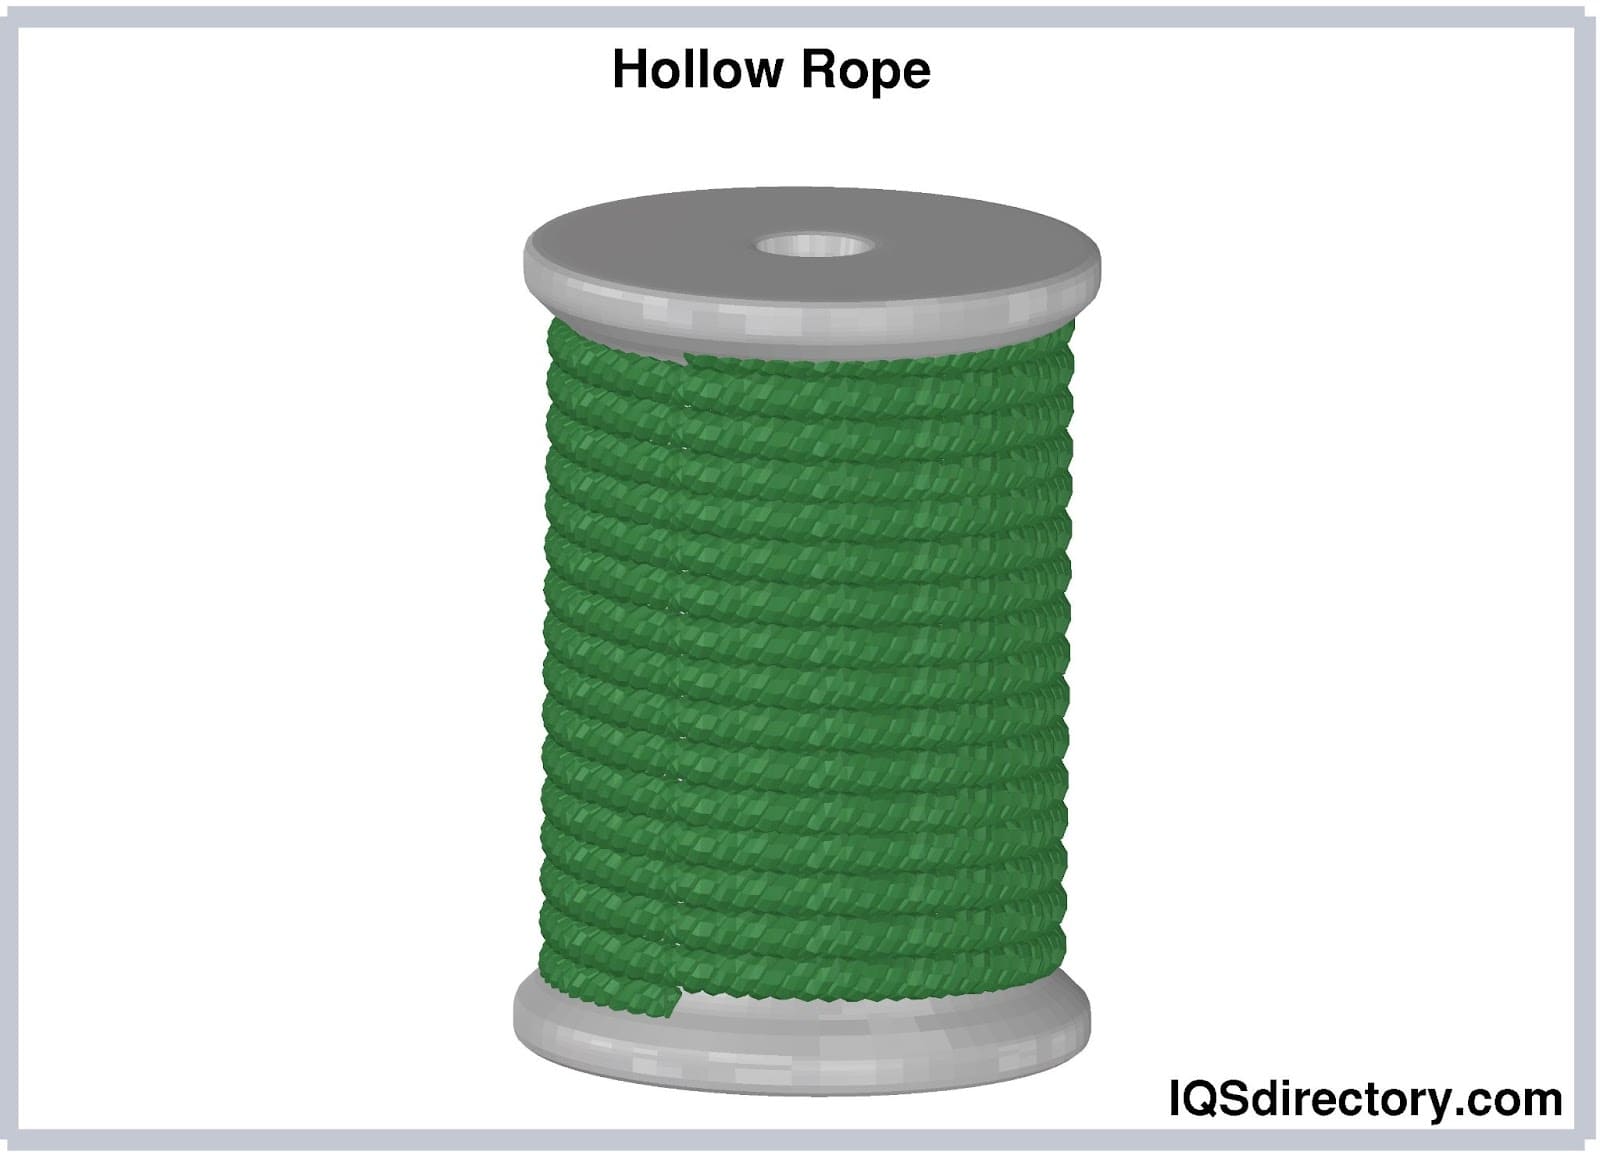 Hollow Rope